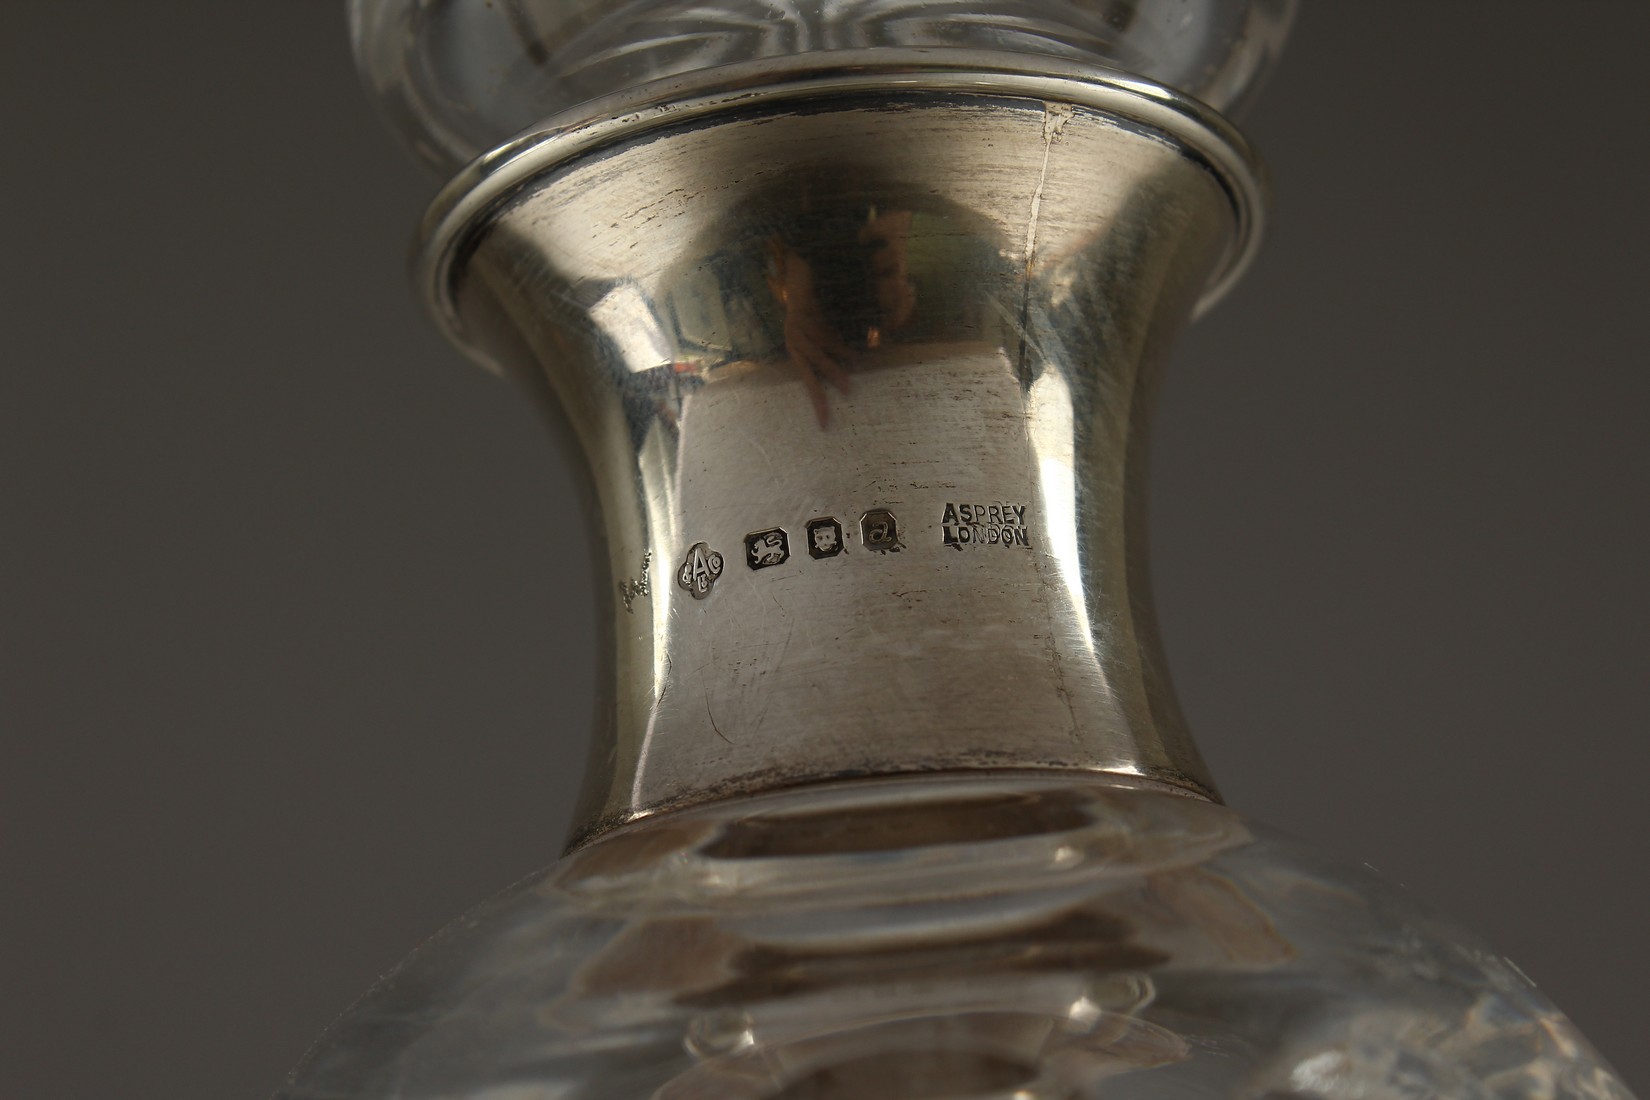 AN ASPREY CUT GLASS DECANTER AND STOPPER with silver band. - Image 2 of 5